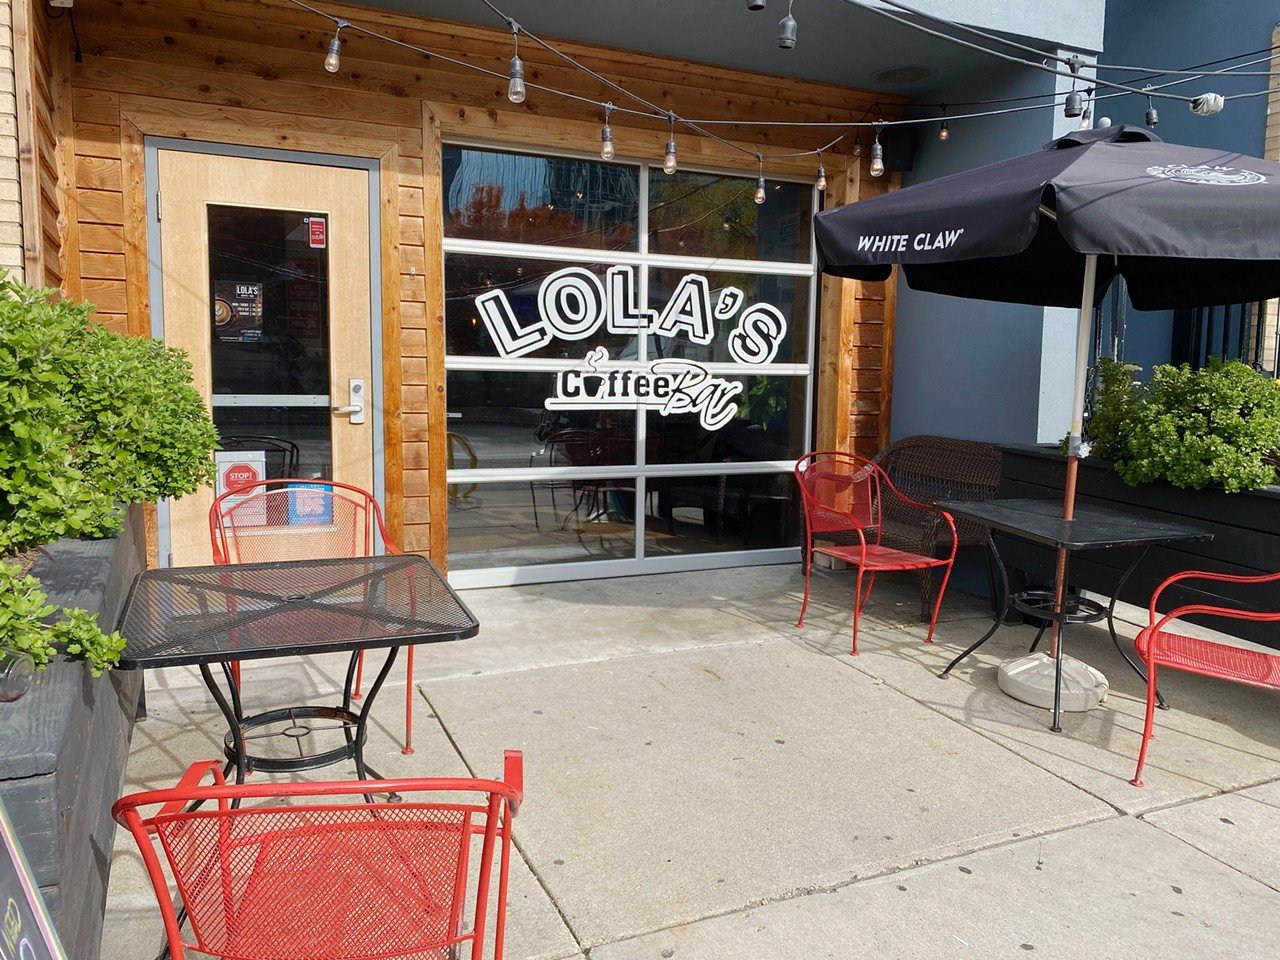 Lola’s Coffee and Bar
24 W. Third St., Downtown
Lola's doesn't just serve up craft coffee; they've also got cocktails, wine, local beer and a food menu that ranges from bagels to take and bake empanadas. They offer traditional coffee and espresso drinks plus seasonal specials like the Island Oasis Latte made with coconut, almond and rose.